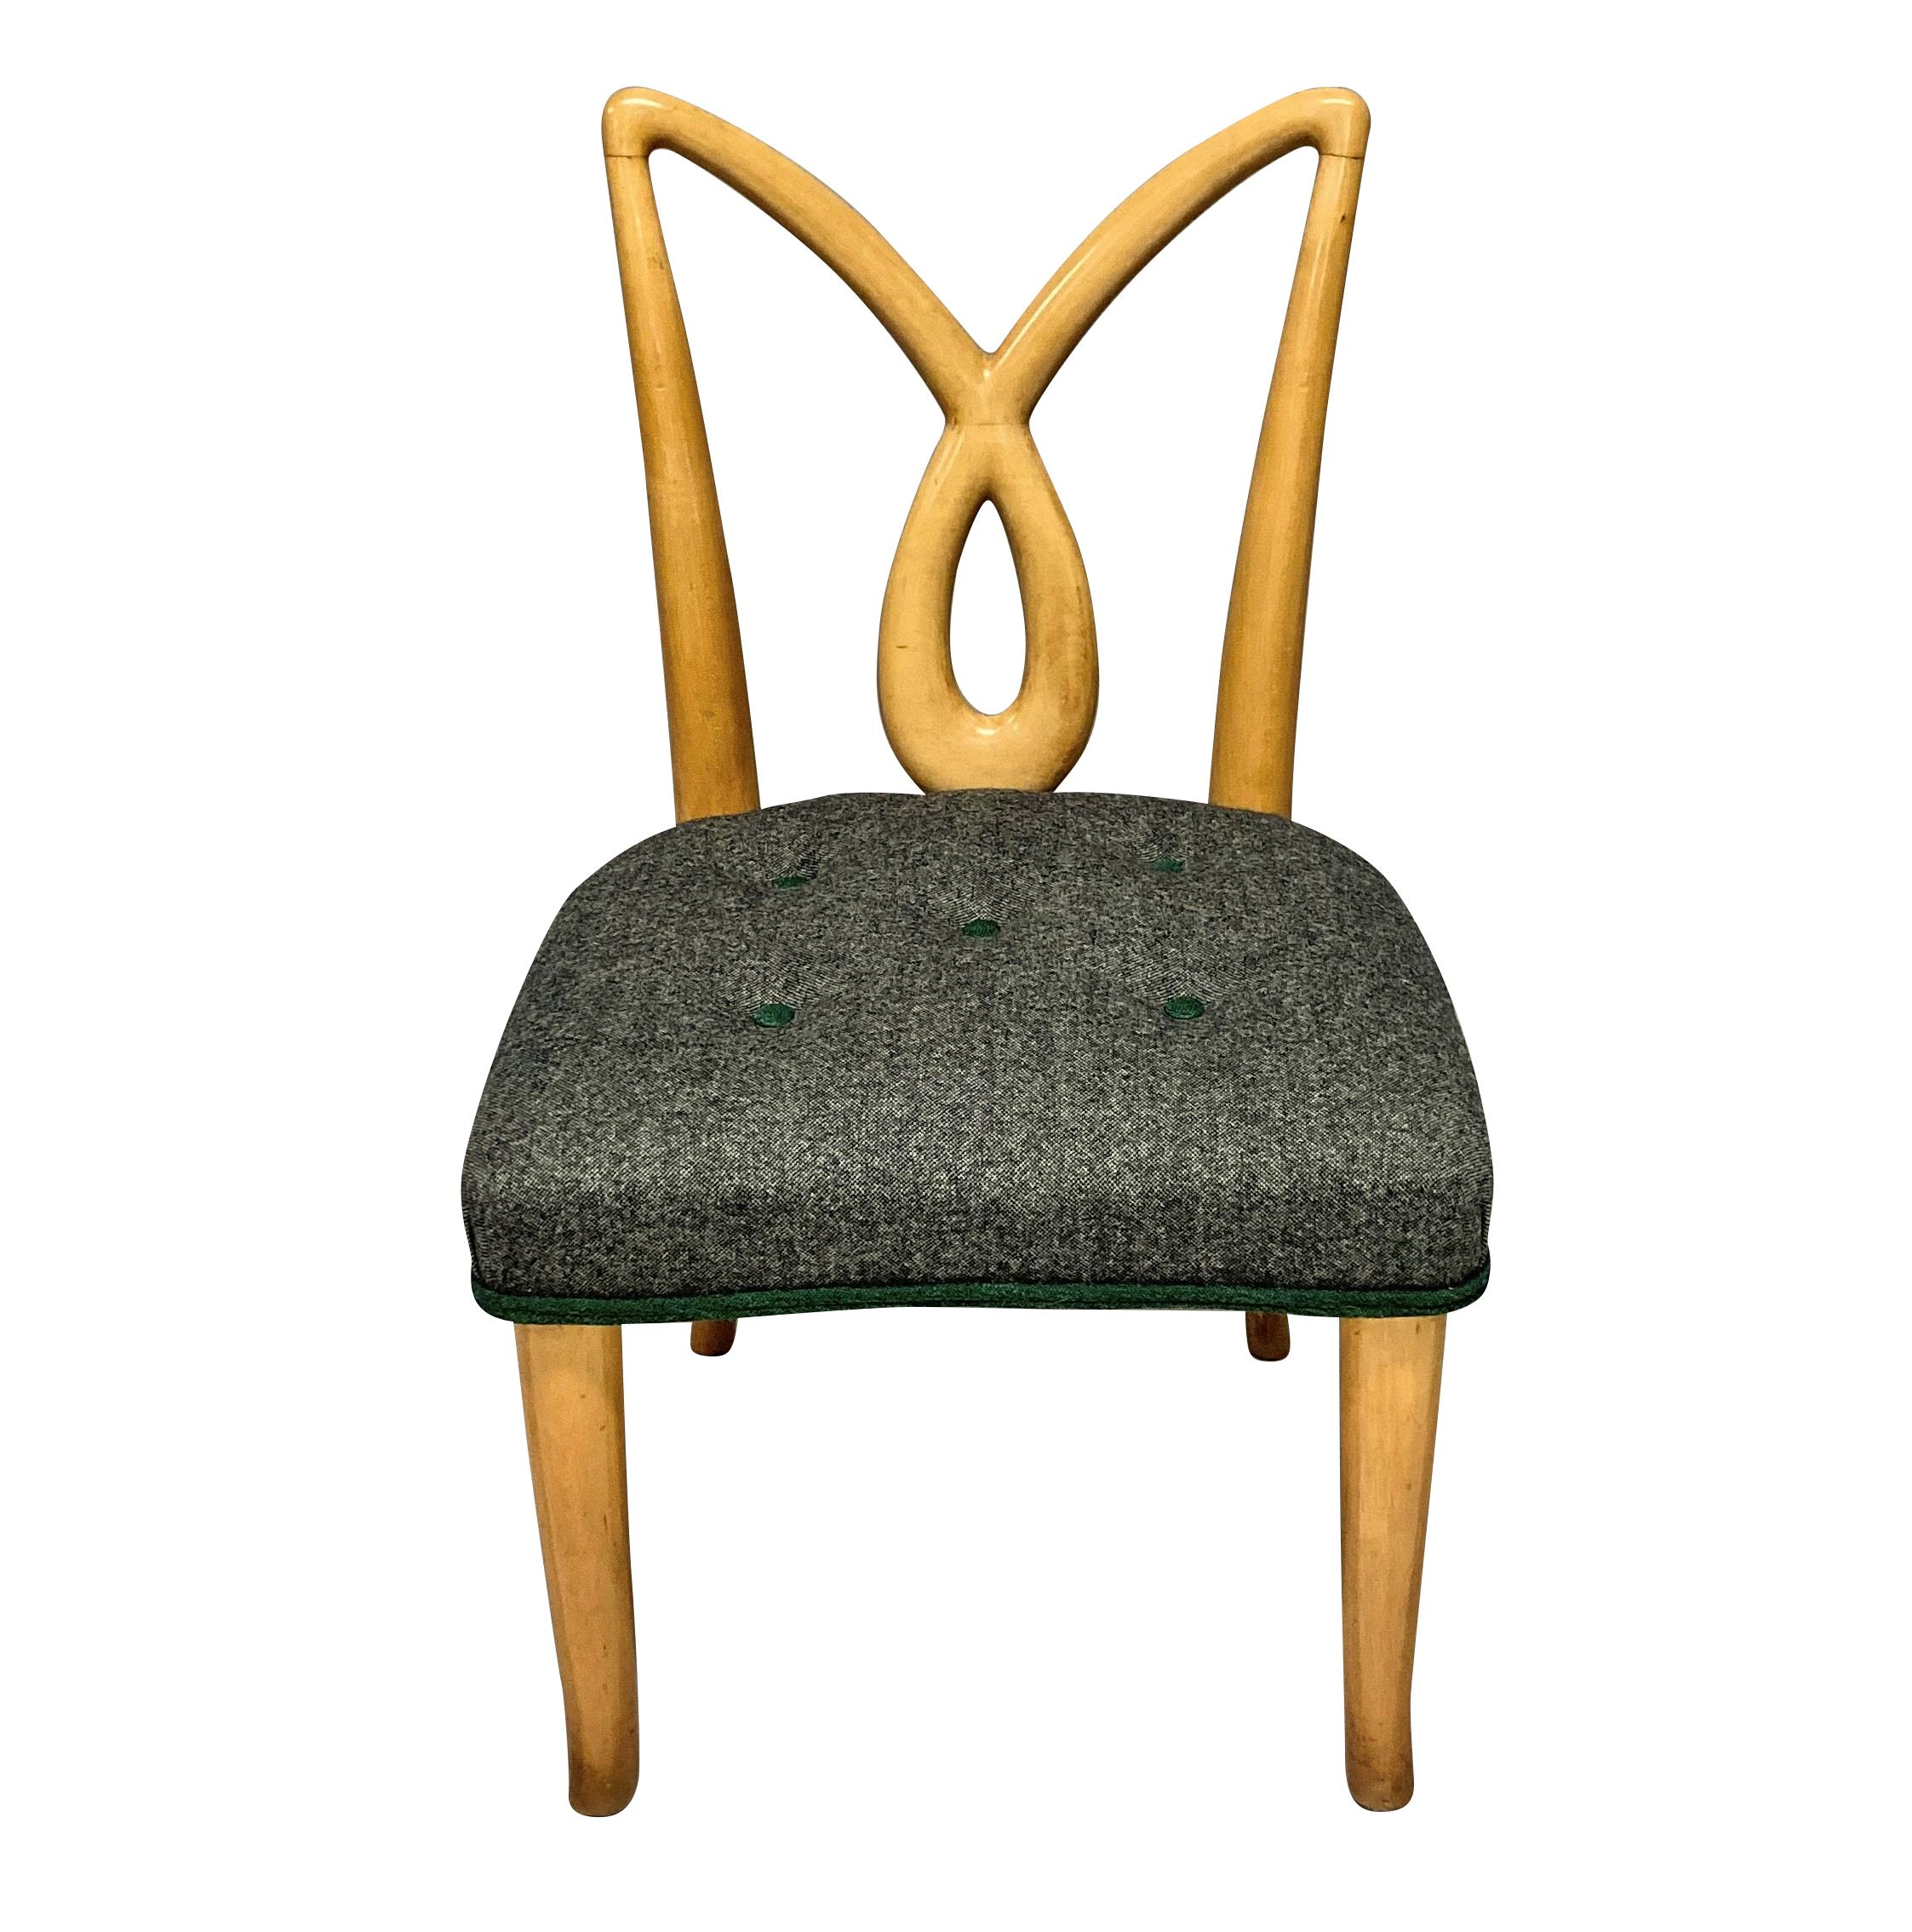 A pair of Italian mid-century hall chairs with sculptural backs, in lemon wood. The seats newly upholstered in grey wool with emerald green detailing.